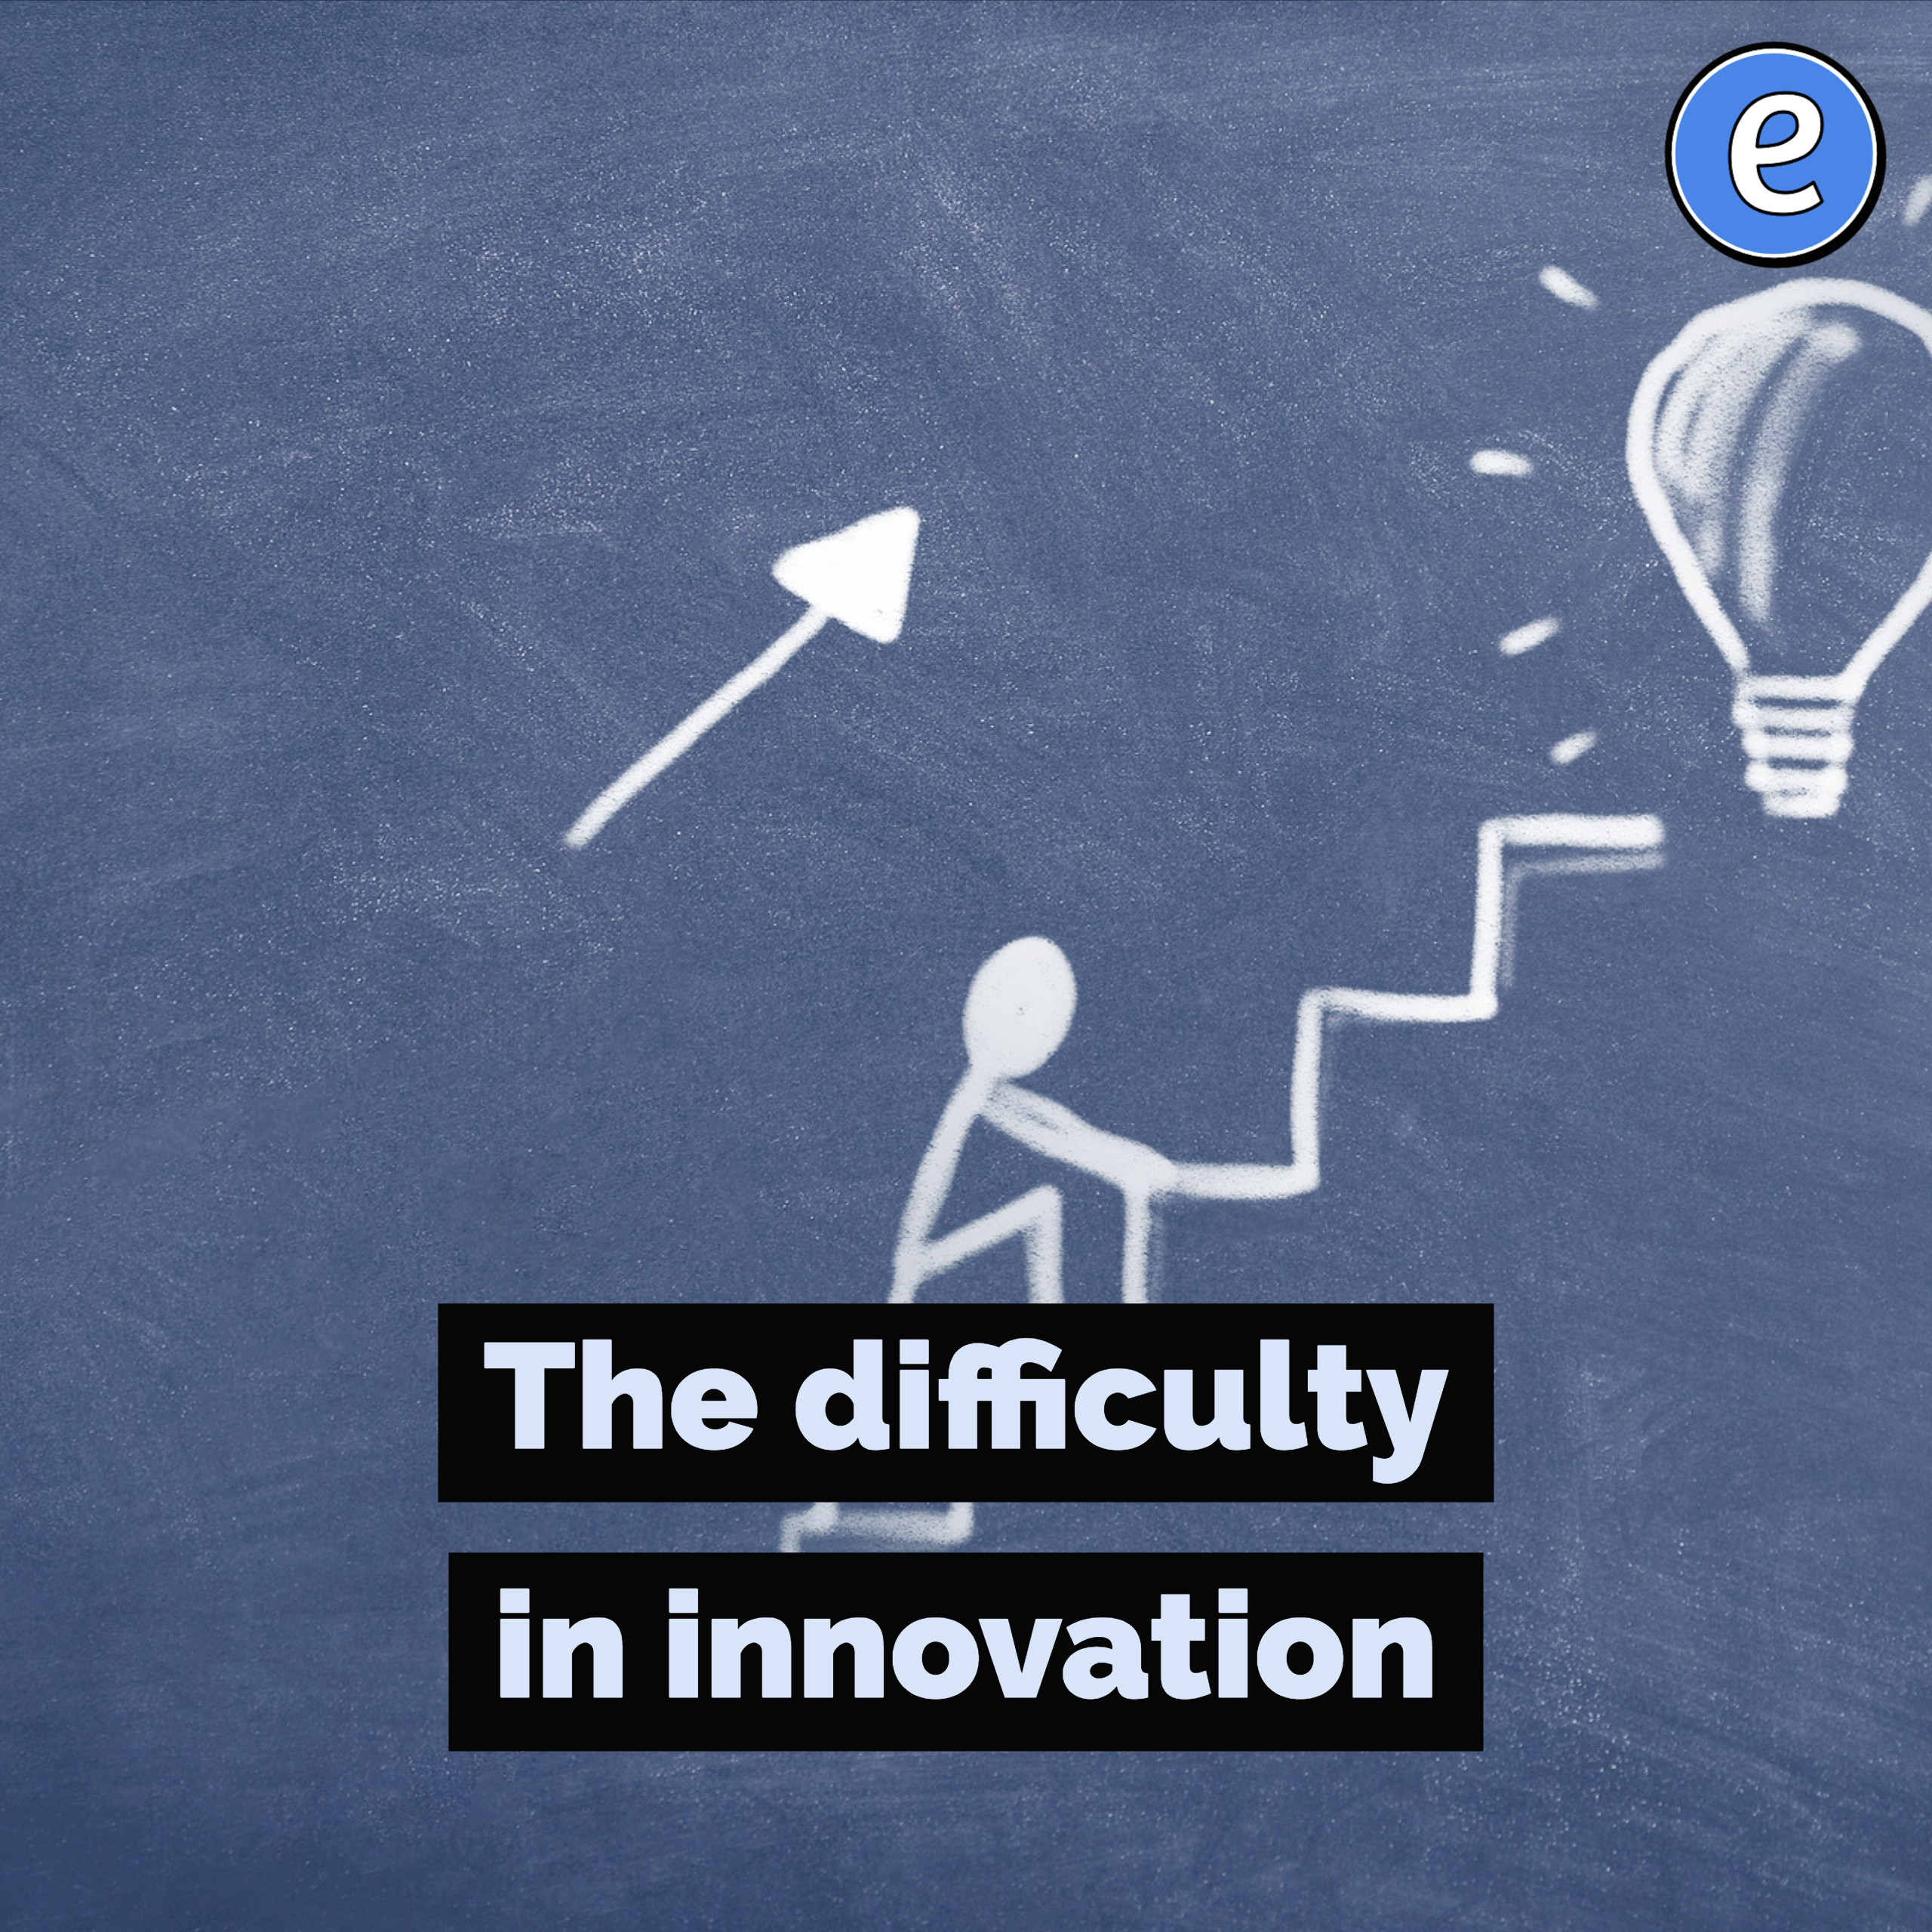 The difficulty in innovation